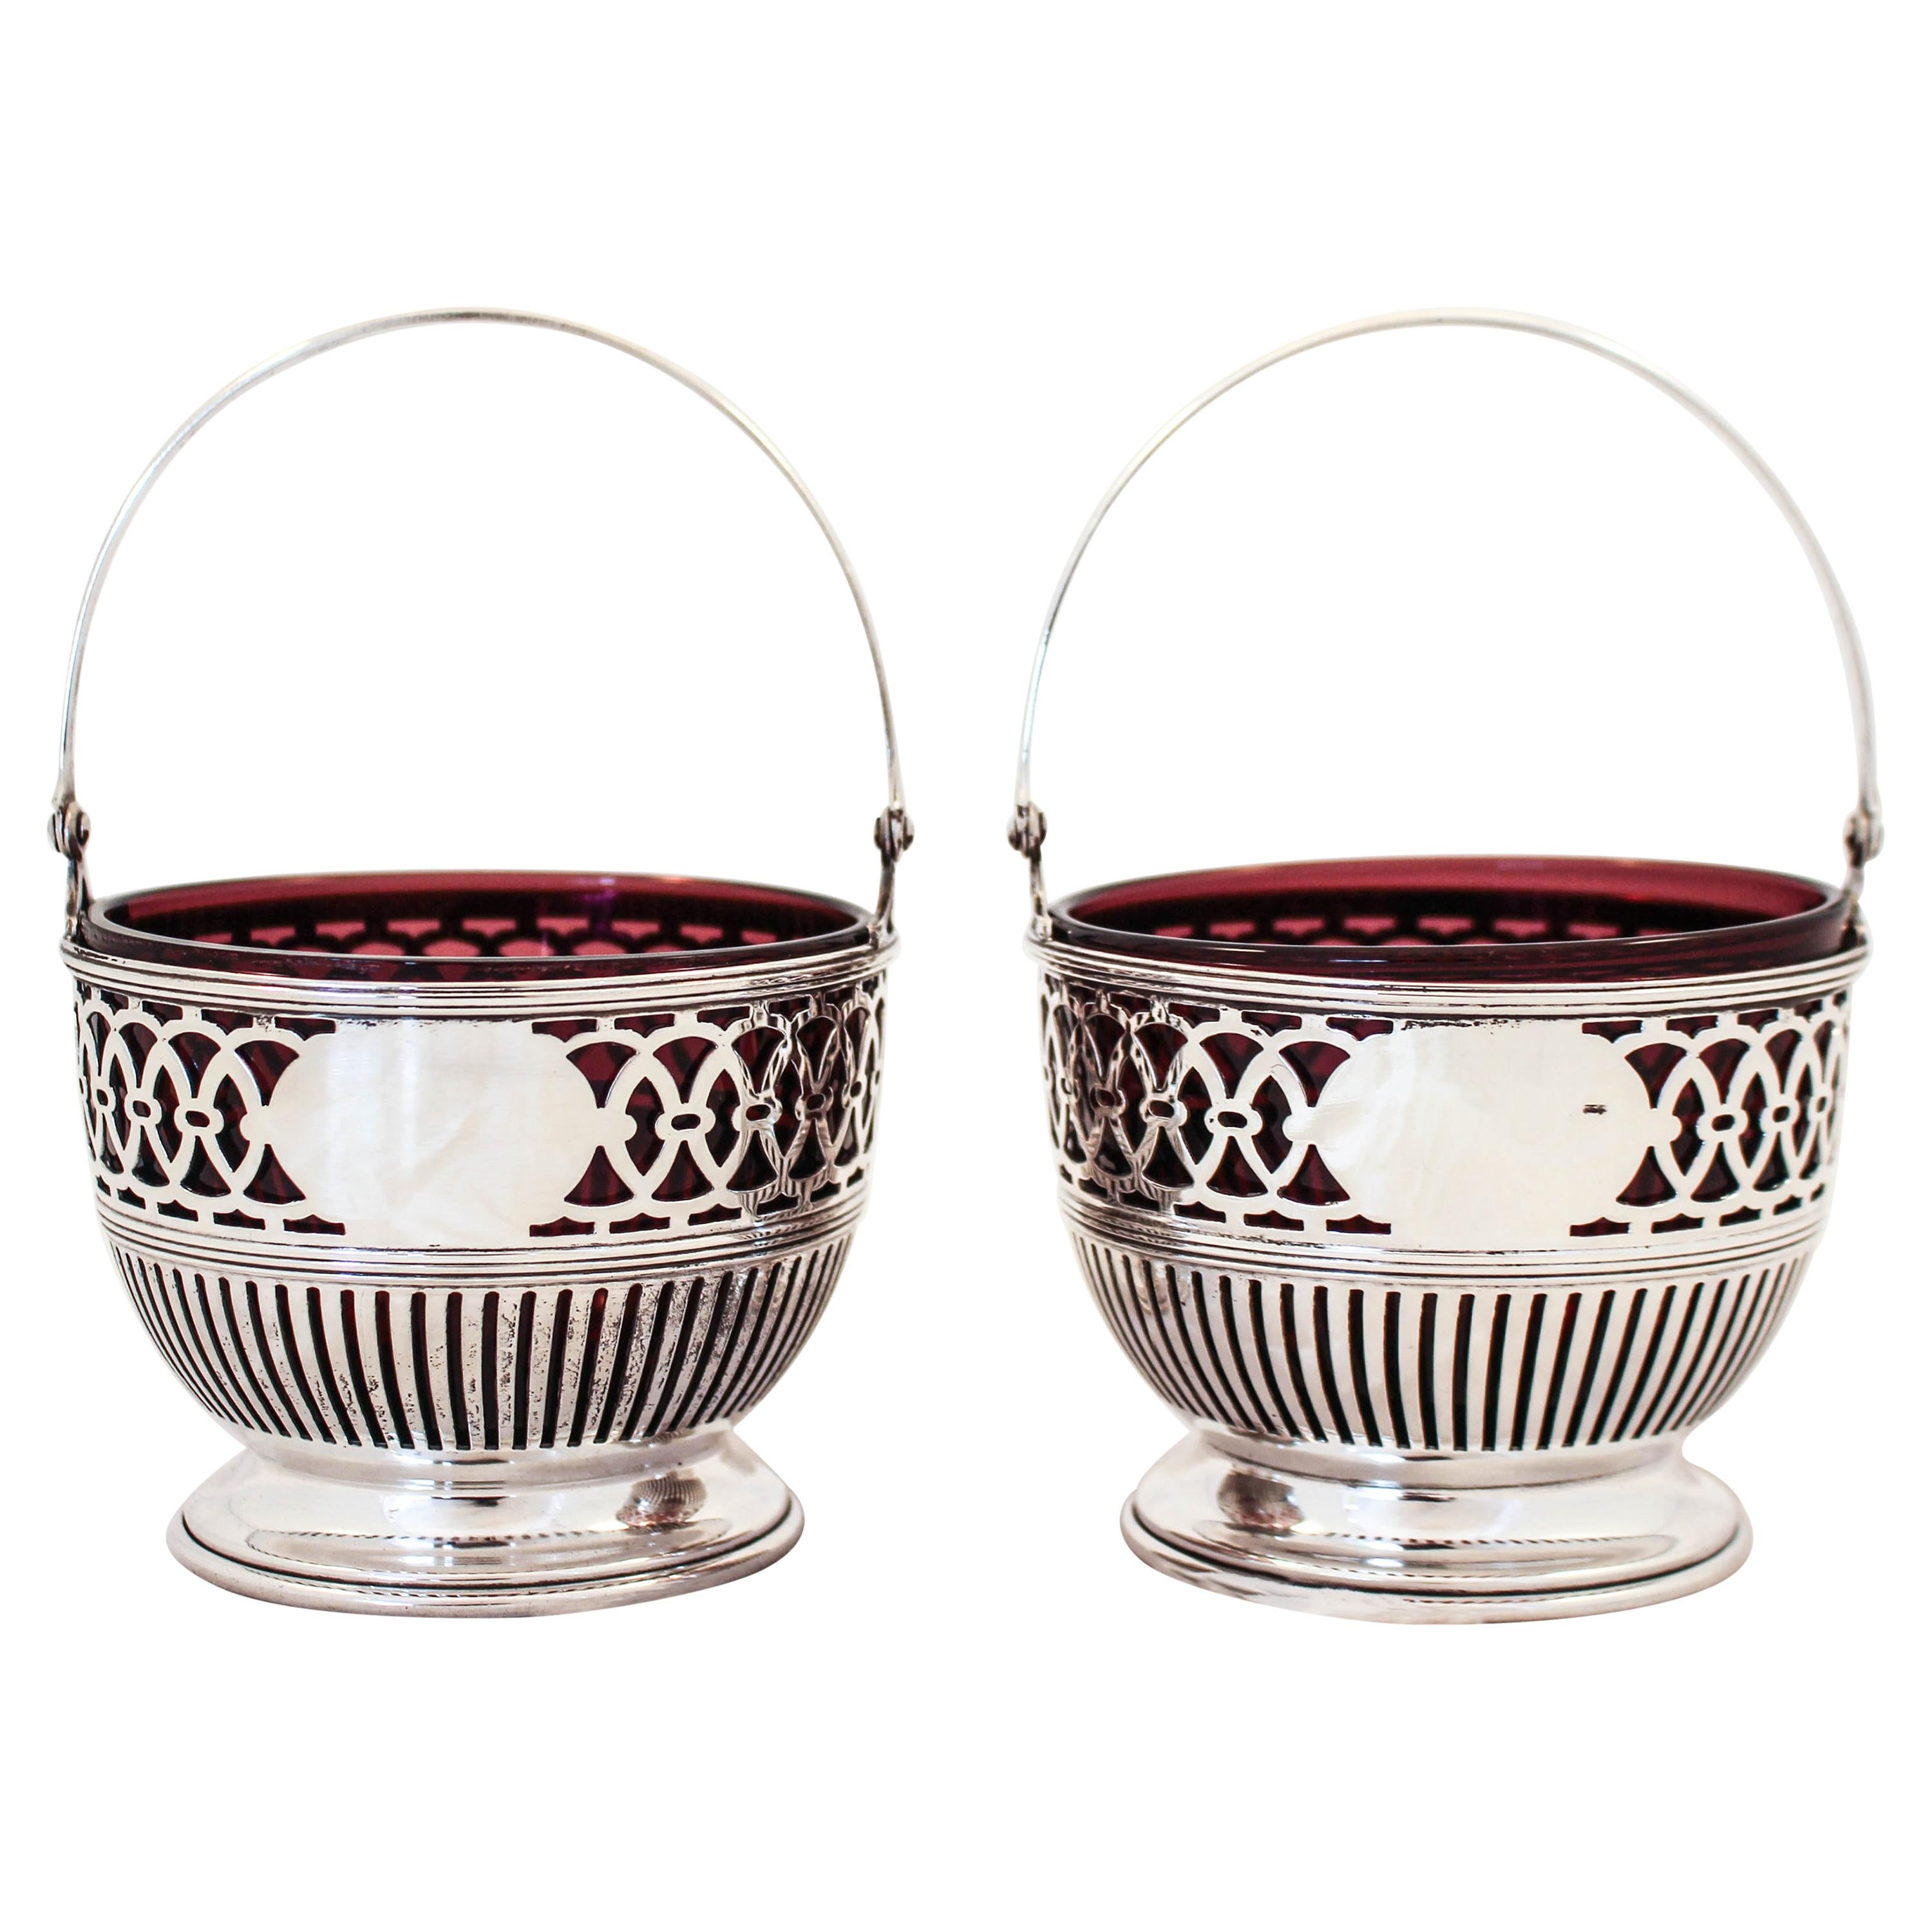 Pair of Sterling Baskets with Amethyst Glass